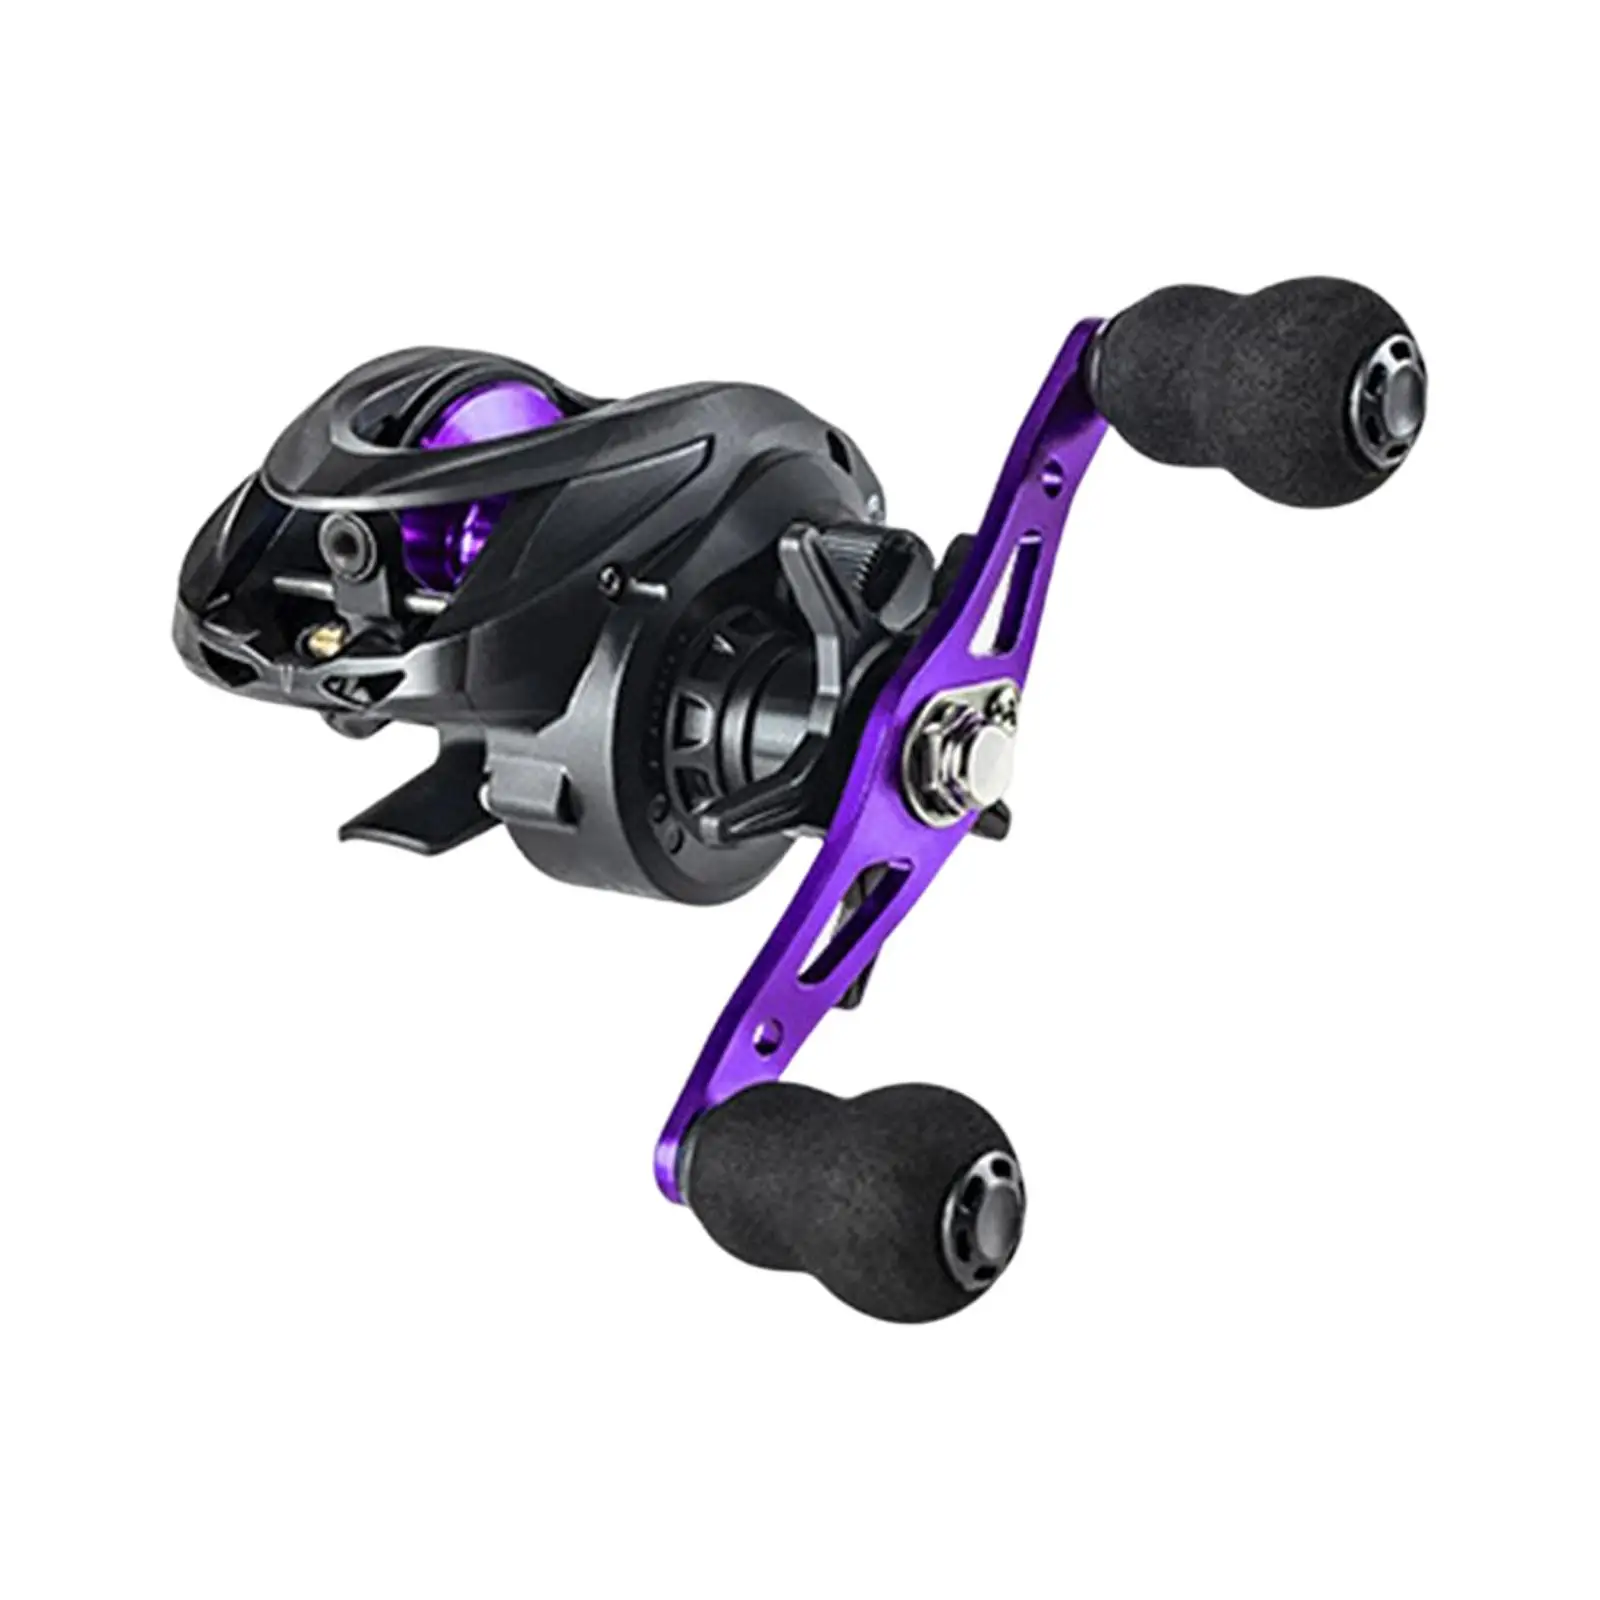 Classic Baitcasting Fishing Reel 6.3:1 Ratio Baitcaster L/R Hand Saltwater for Freshwater Ice Fishing Saltwater